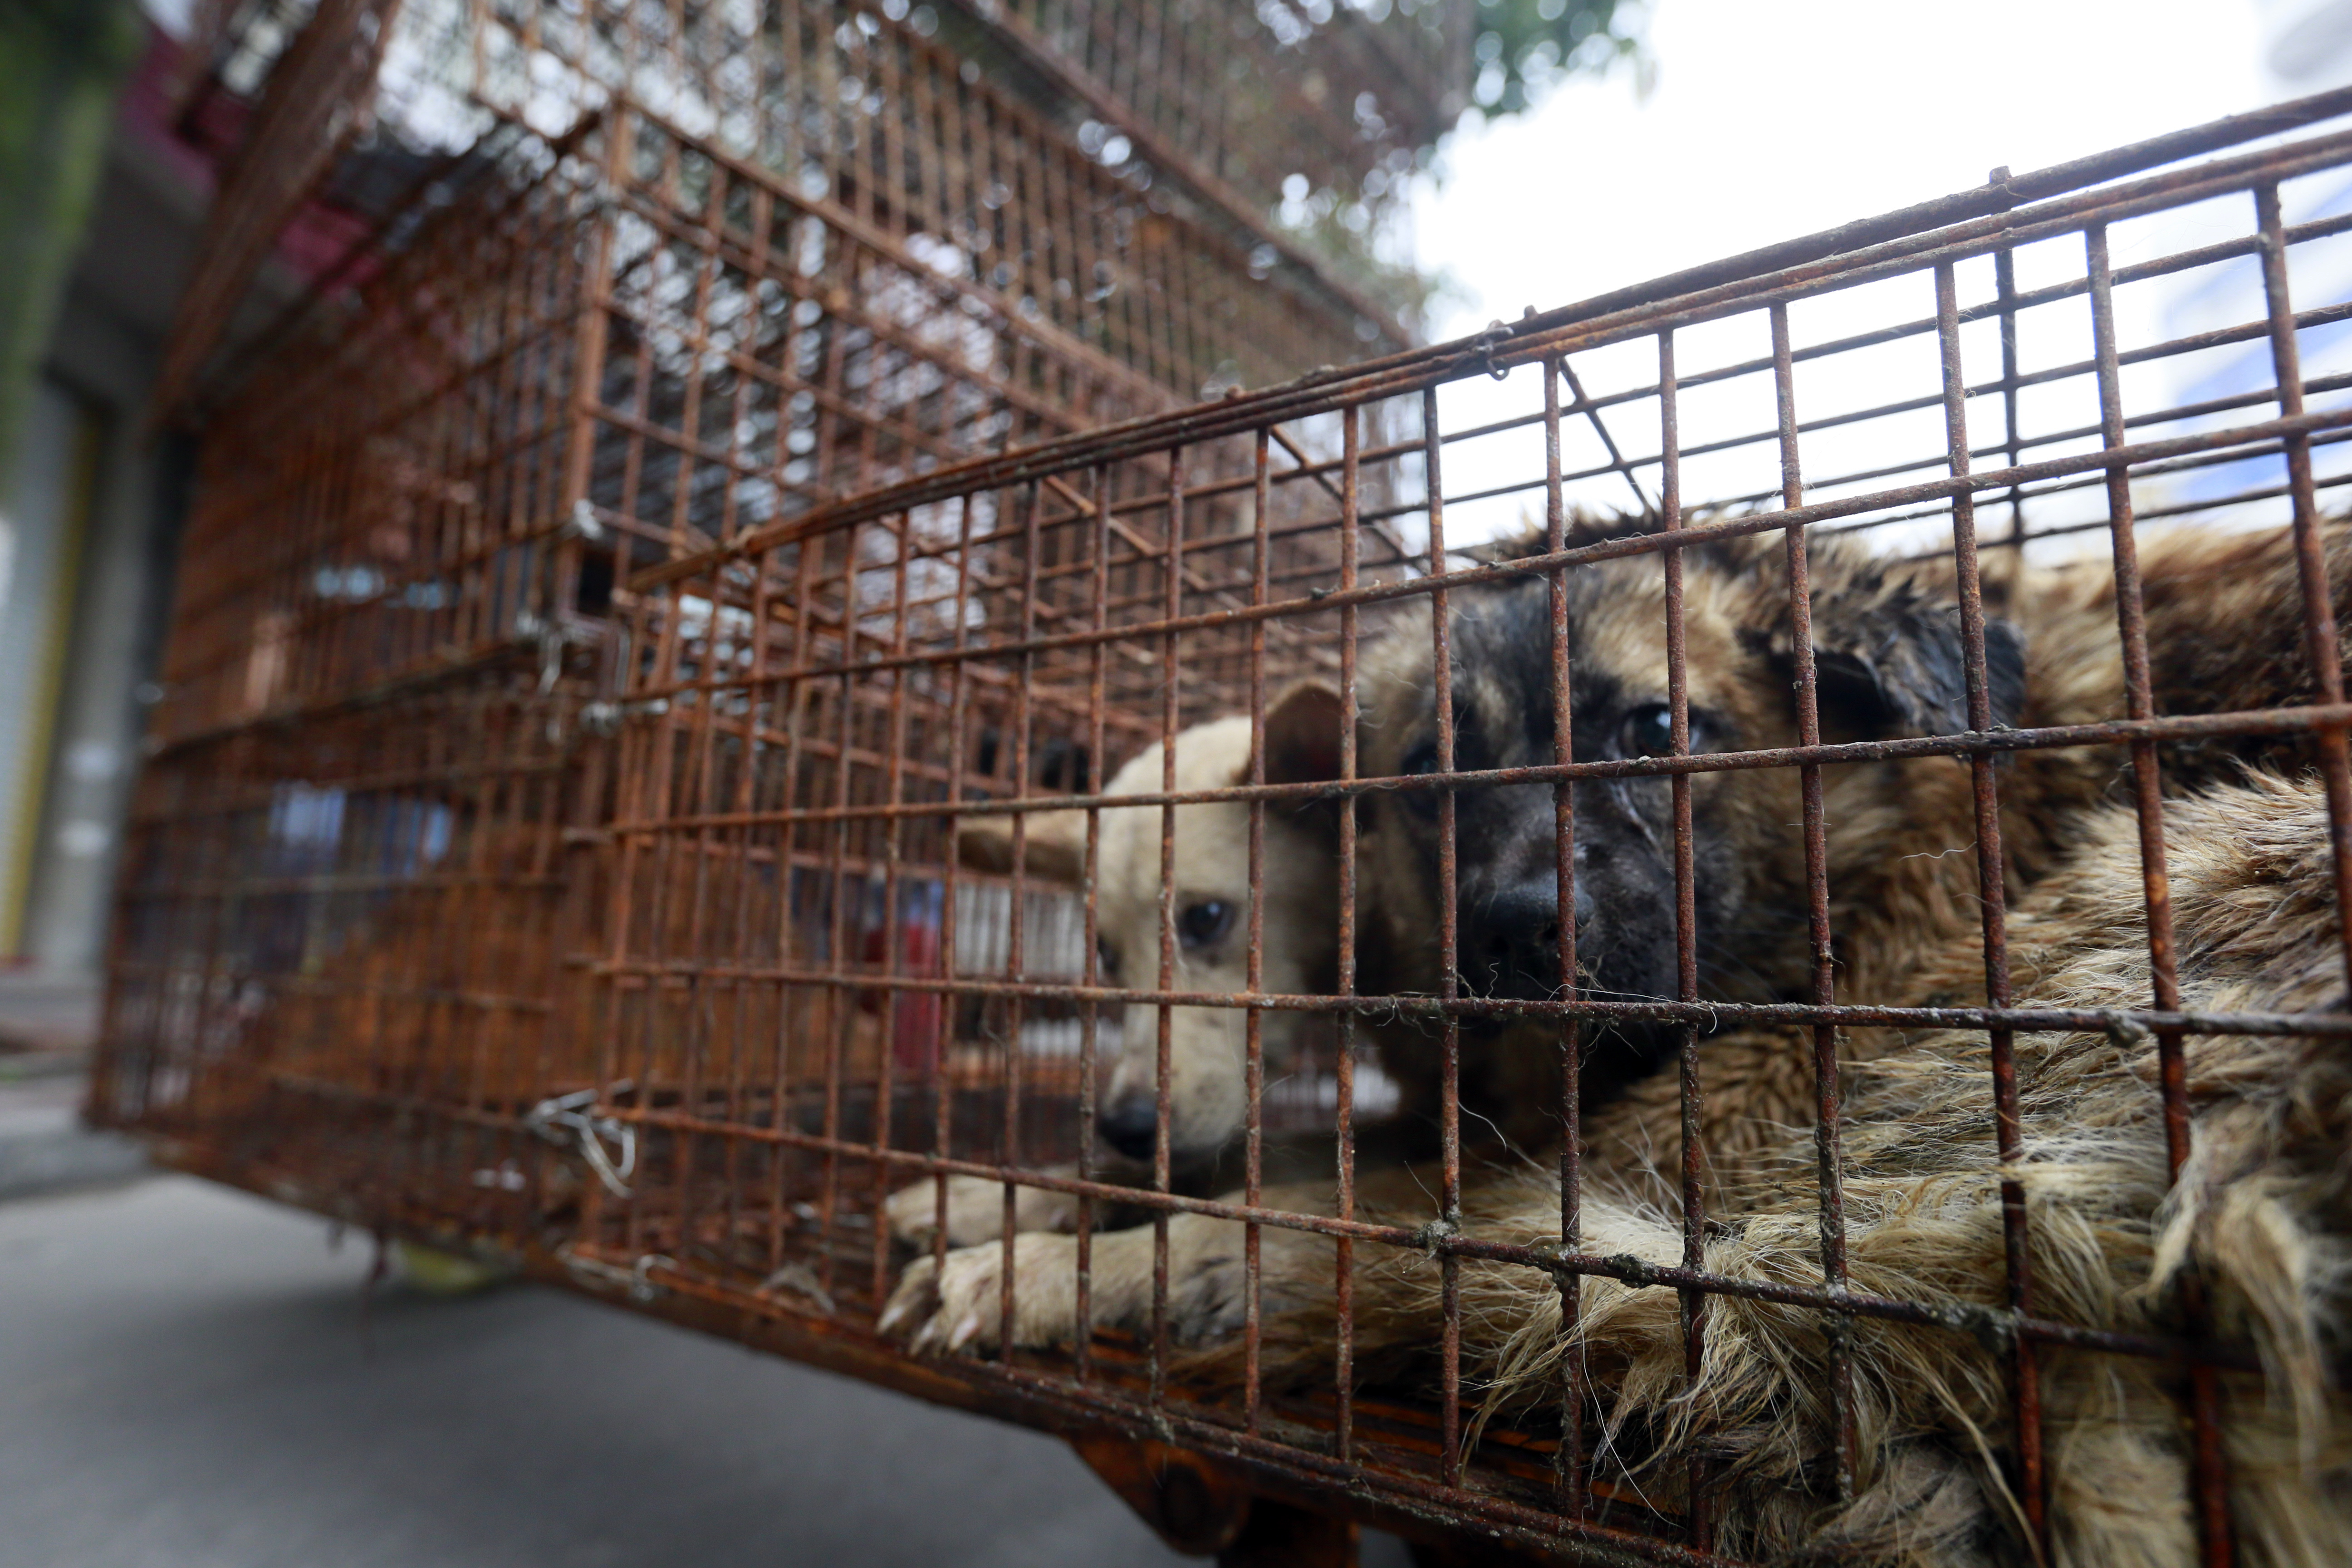 Caged dogs in Yulin waiting to be transferred to a slaughterhouse. Photo: AP Images